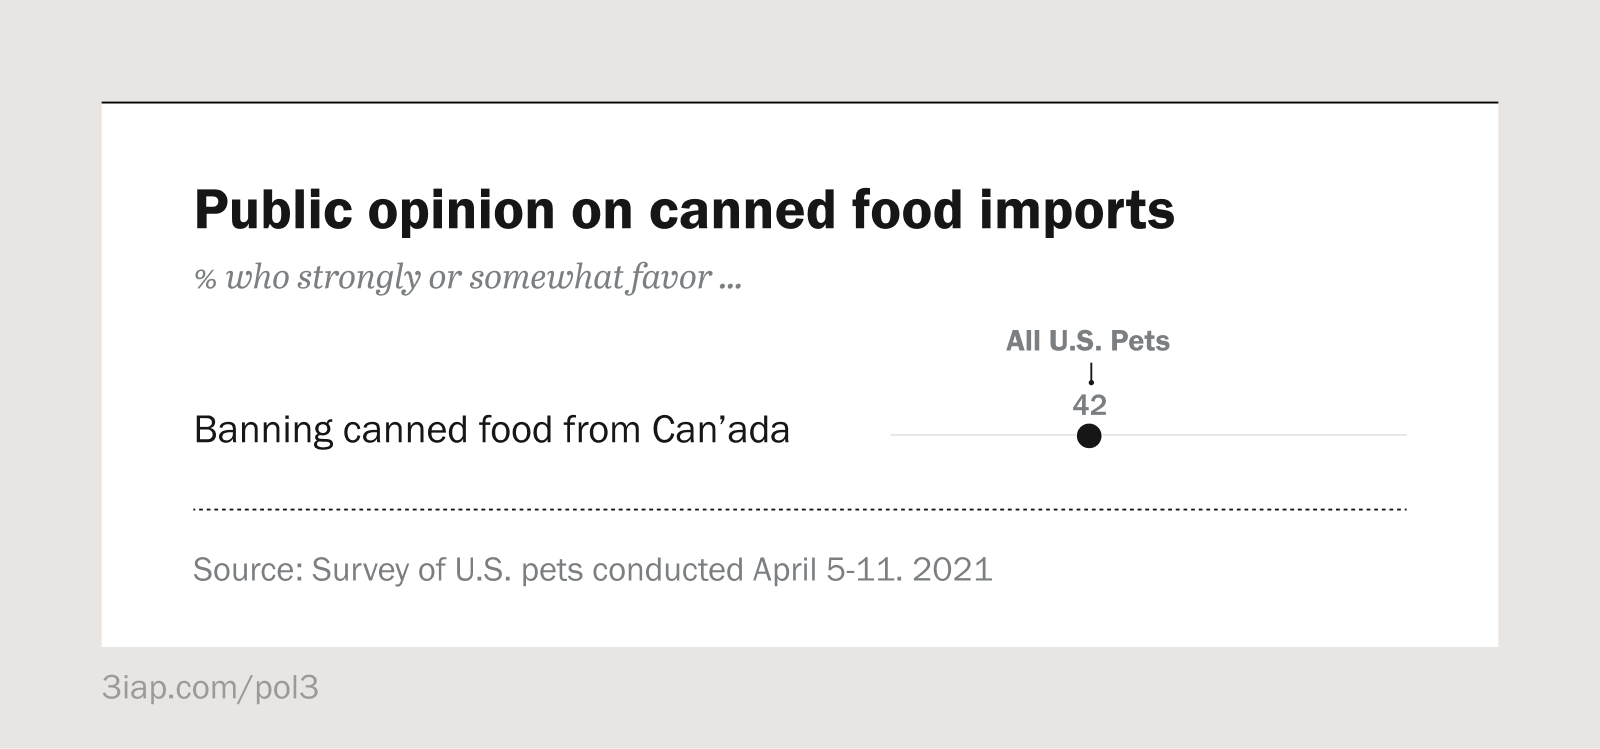 An example dot plot chart showing public support for banning canned pet food from Canada.